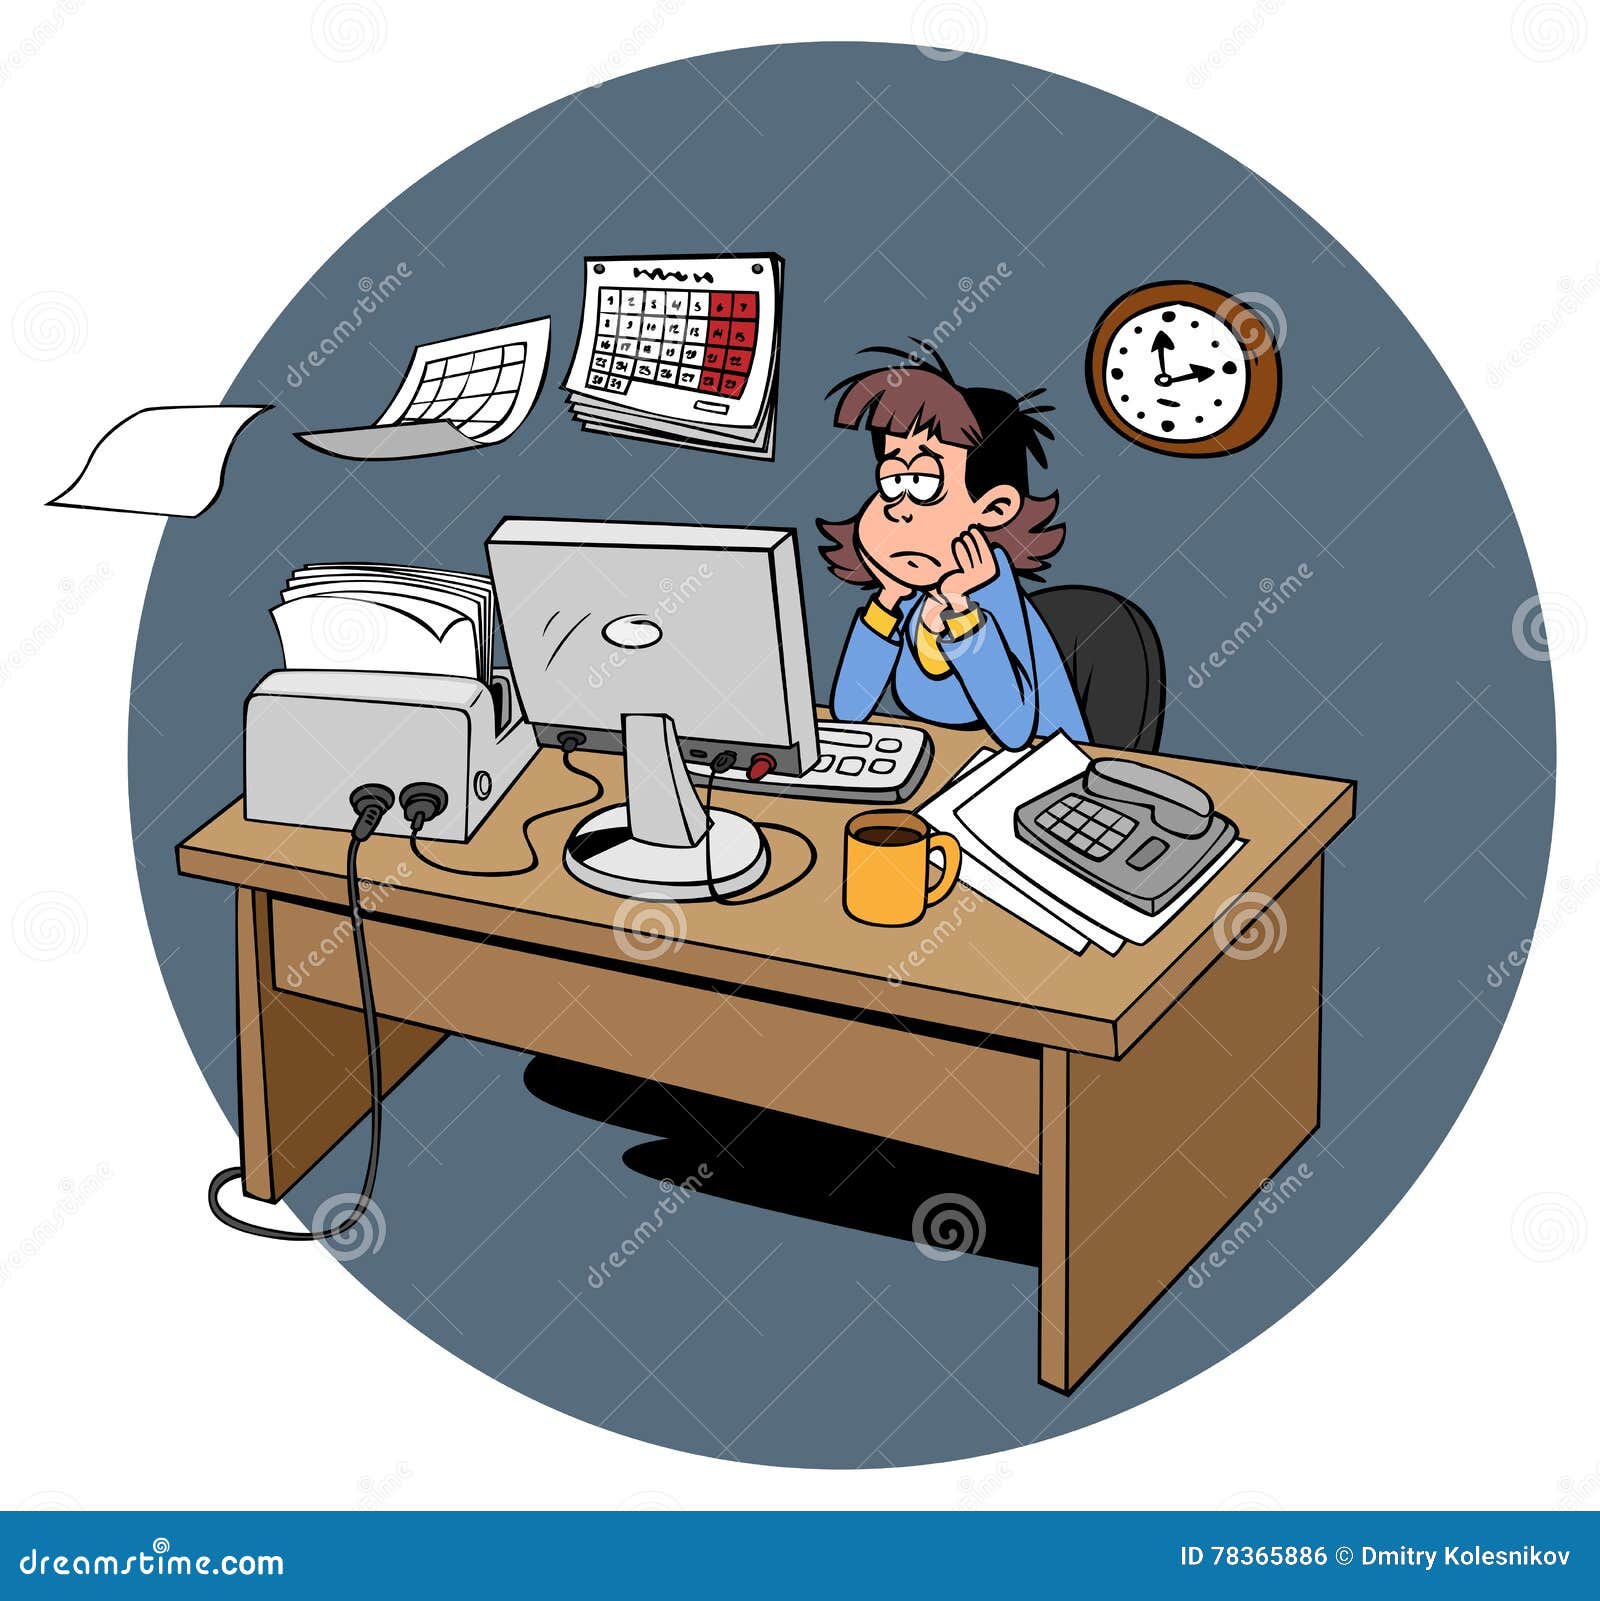 exhausted at work cartoon